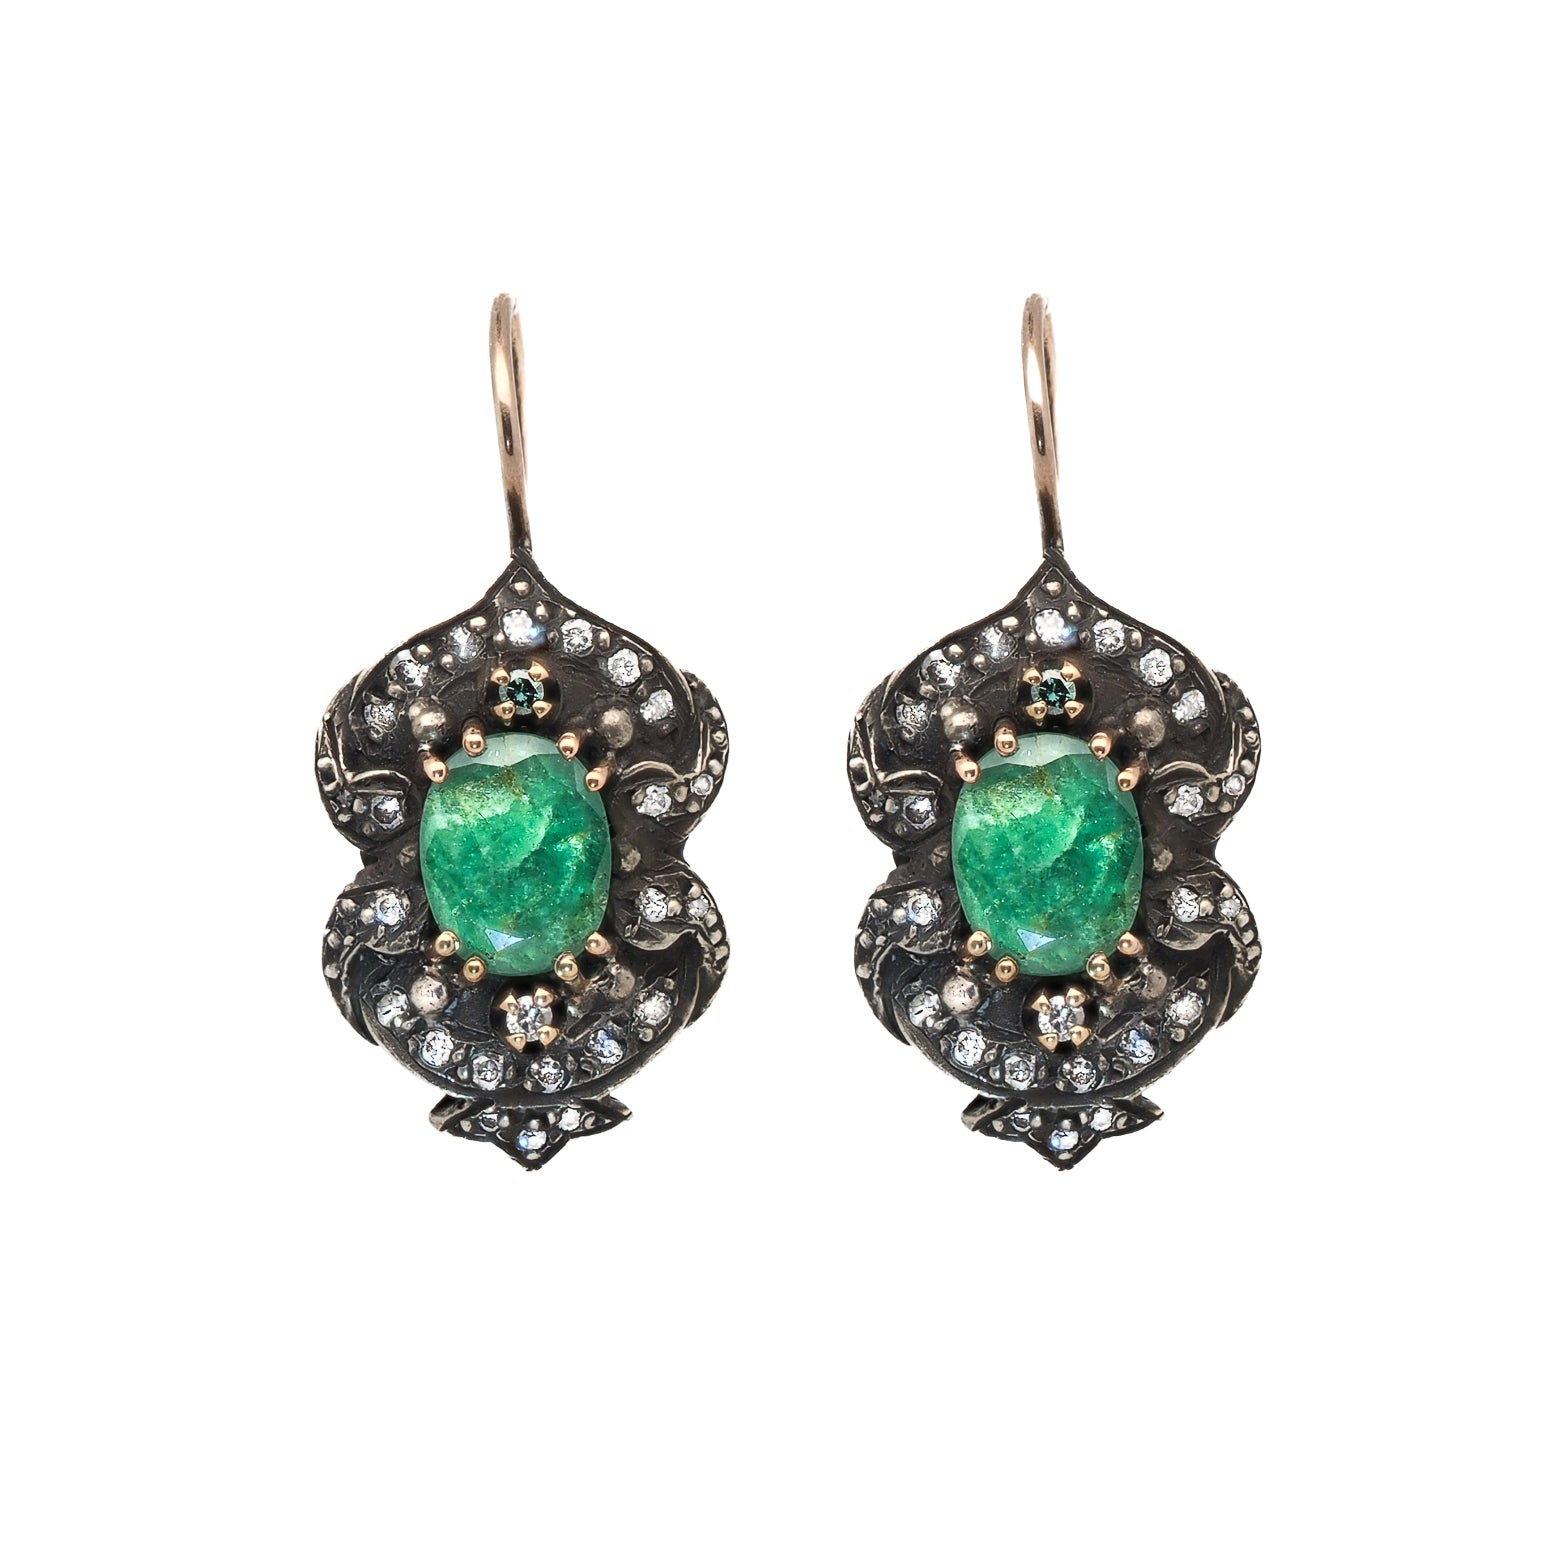 Vintage Diamond Emerald Earring - Handcrafted with 8k Gold and 3.60ct Emerald.